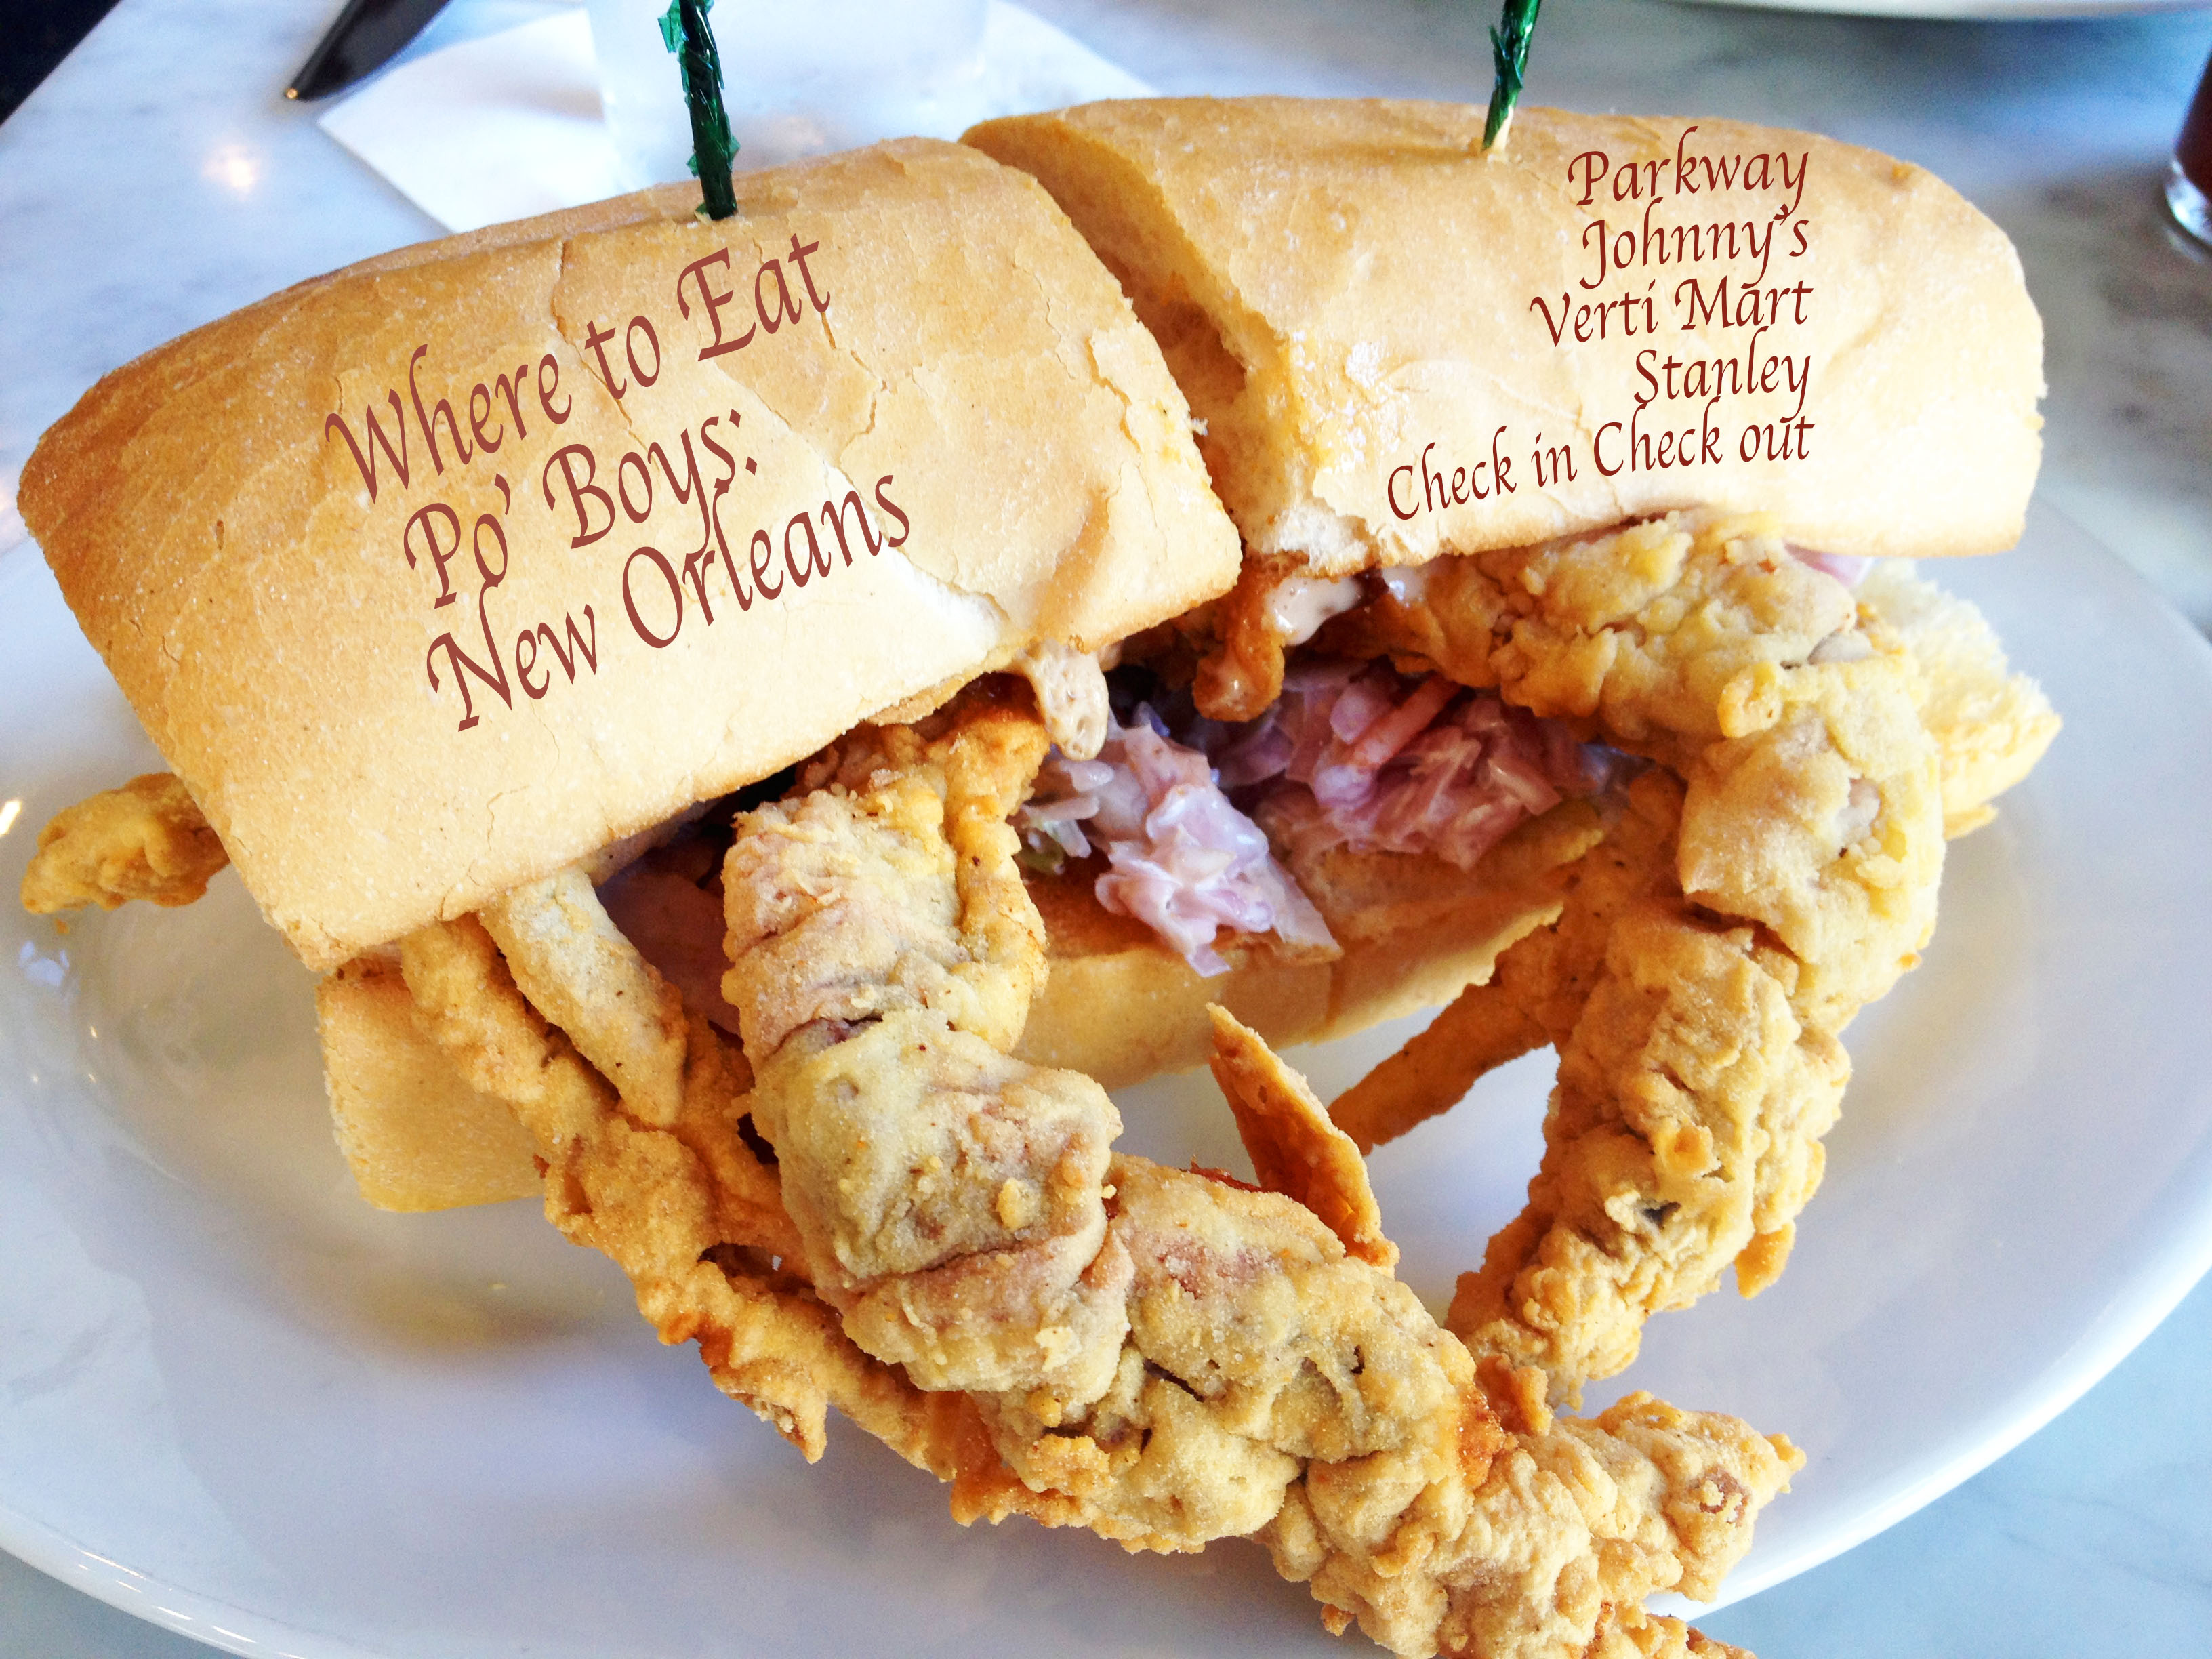 Eating America: The Best Food in New Orleans - The GastroGnome